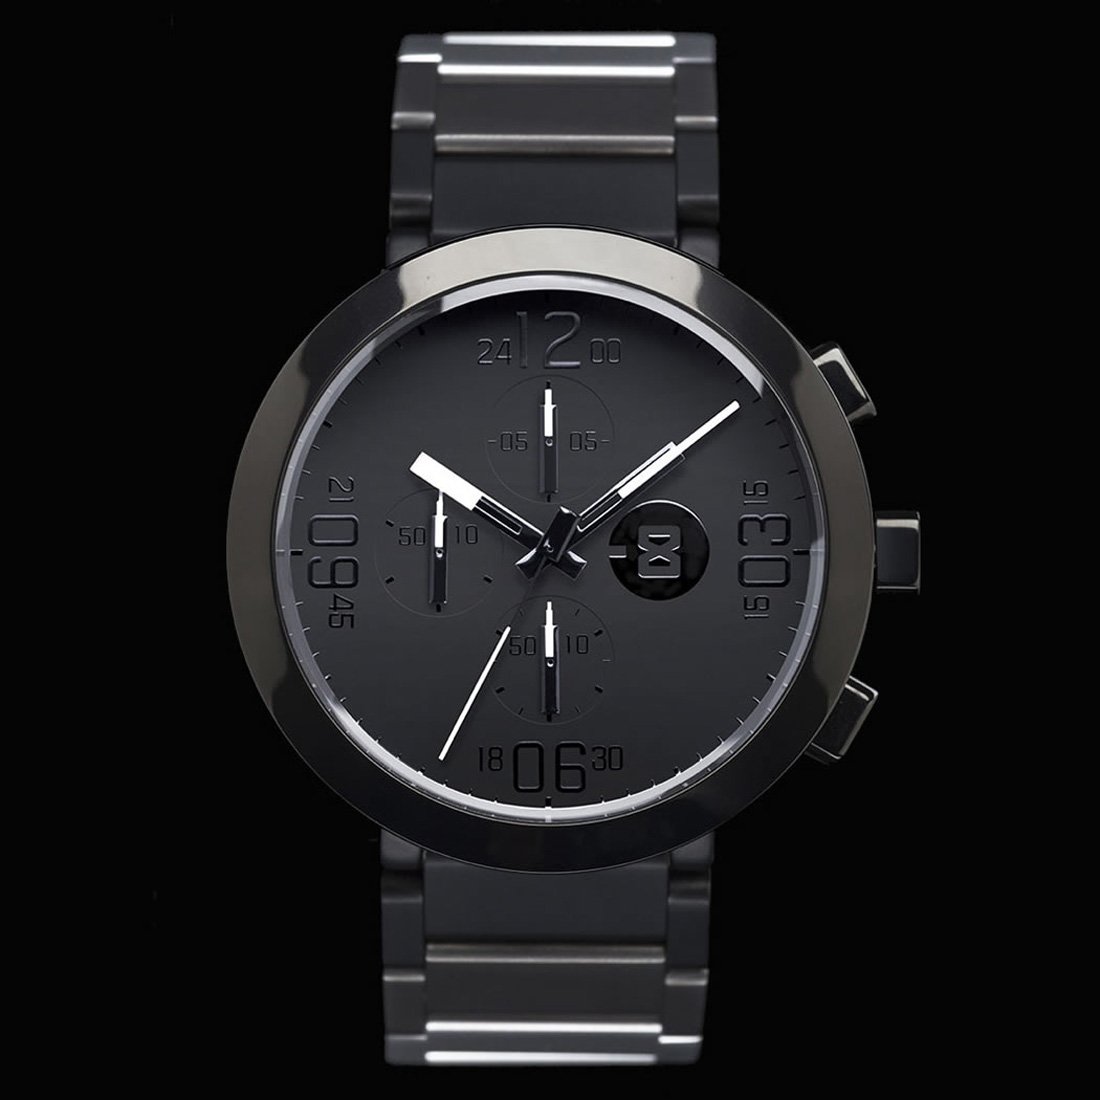 Minus-8 Watches Designed in San Francisco